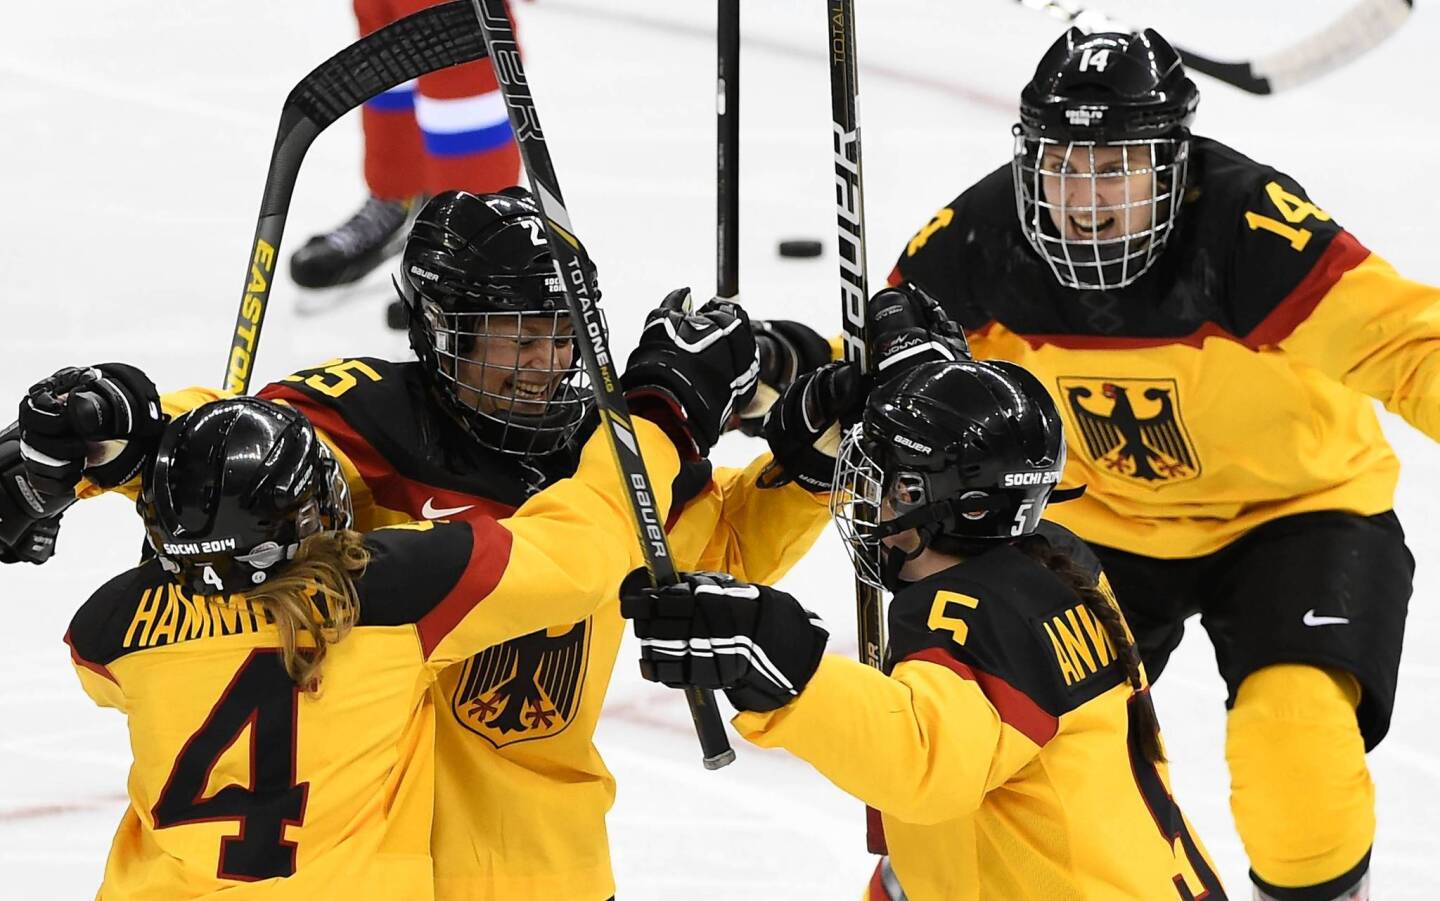 Germany's Franziska Busch, left, celebrates with her teammates after scoring a goal during the women's ice hockey match between Russia and Germany at the Shayba Arena.